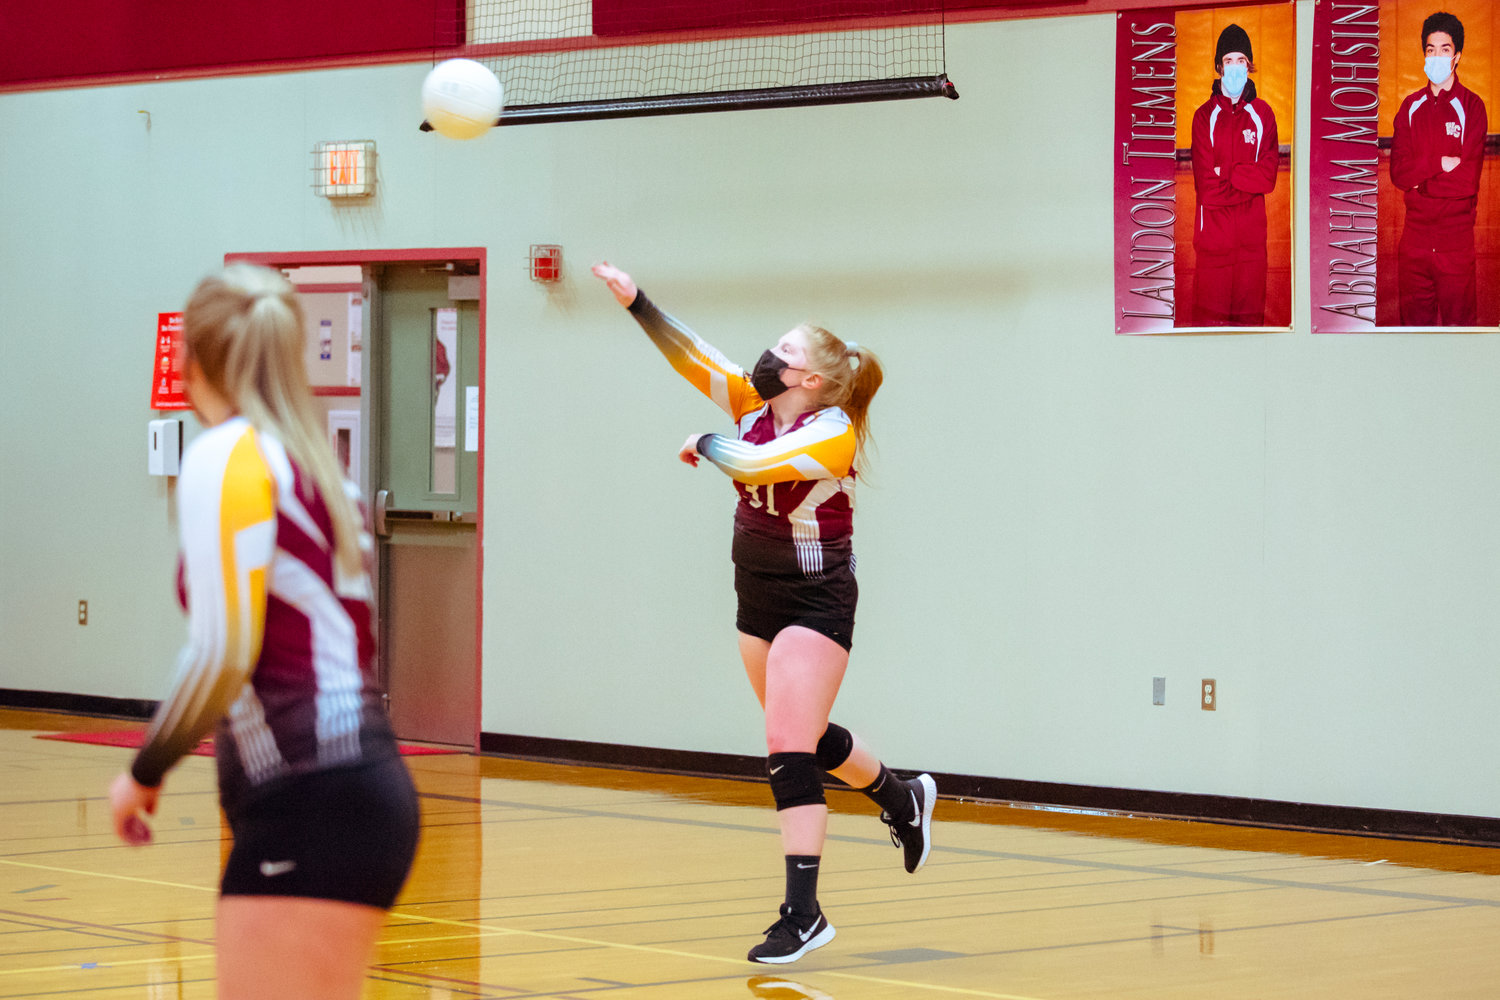 Winlock's Maddy Rohman (31) serves the ball during a game against Toledo played Monday night in Winlock.